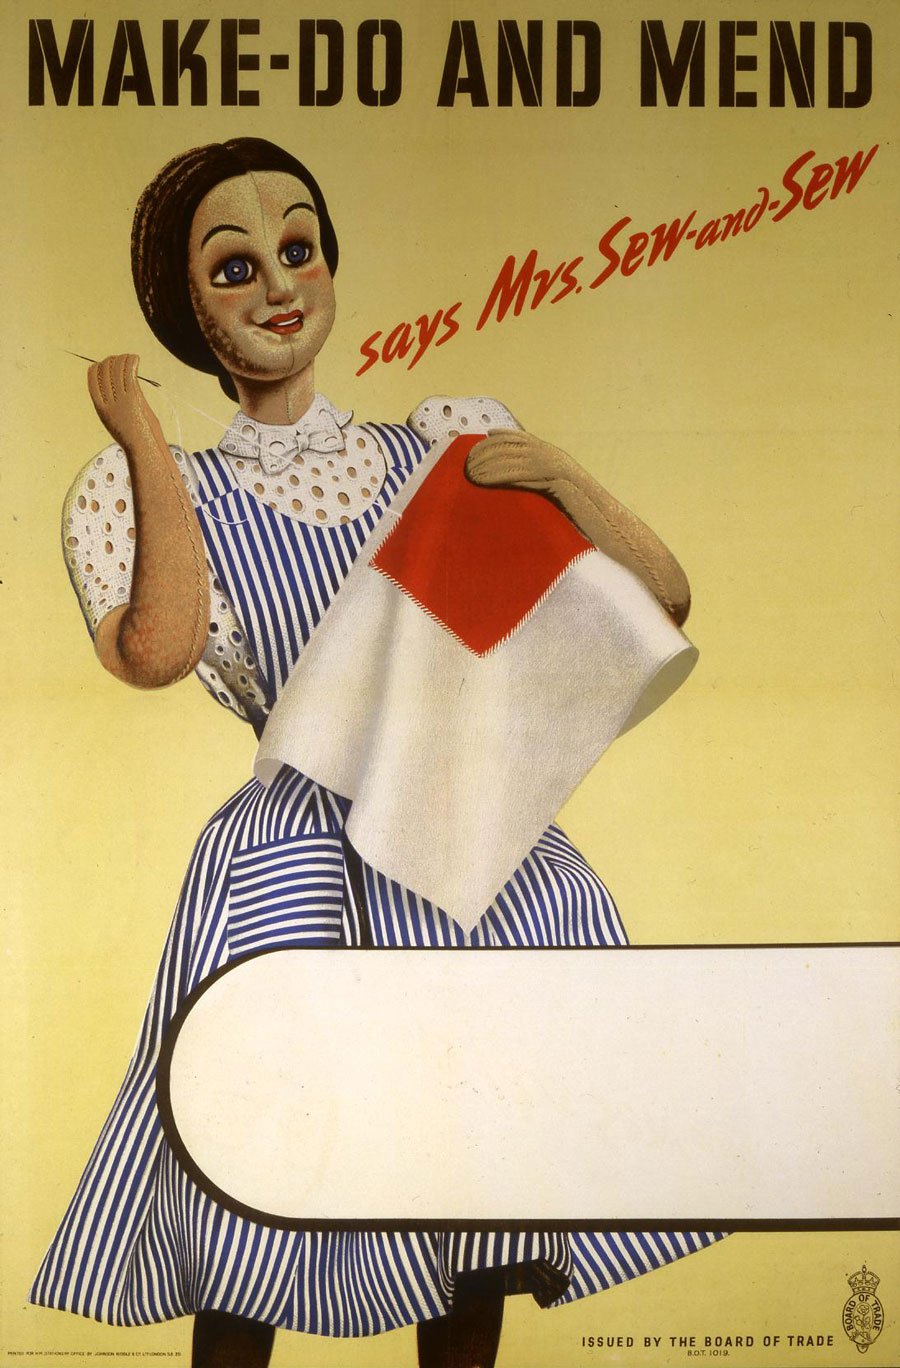 A women is sewing and smiling 'Make-do and mend says Mrs Sew-and-Sew' is written.